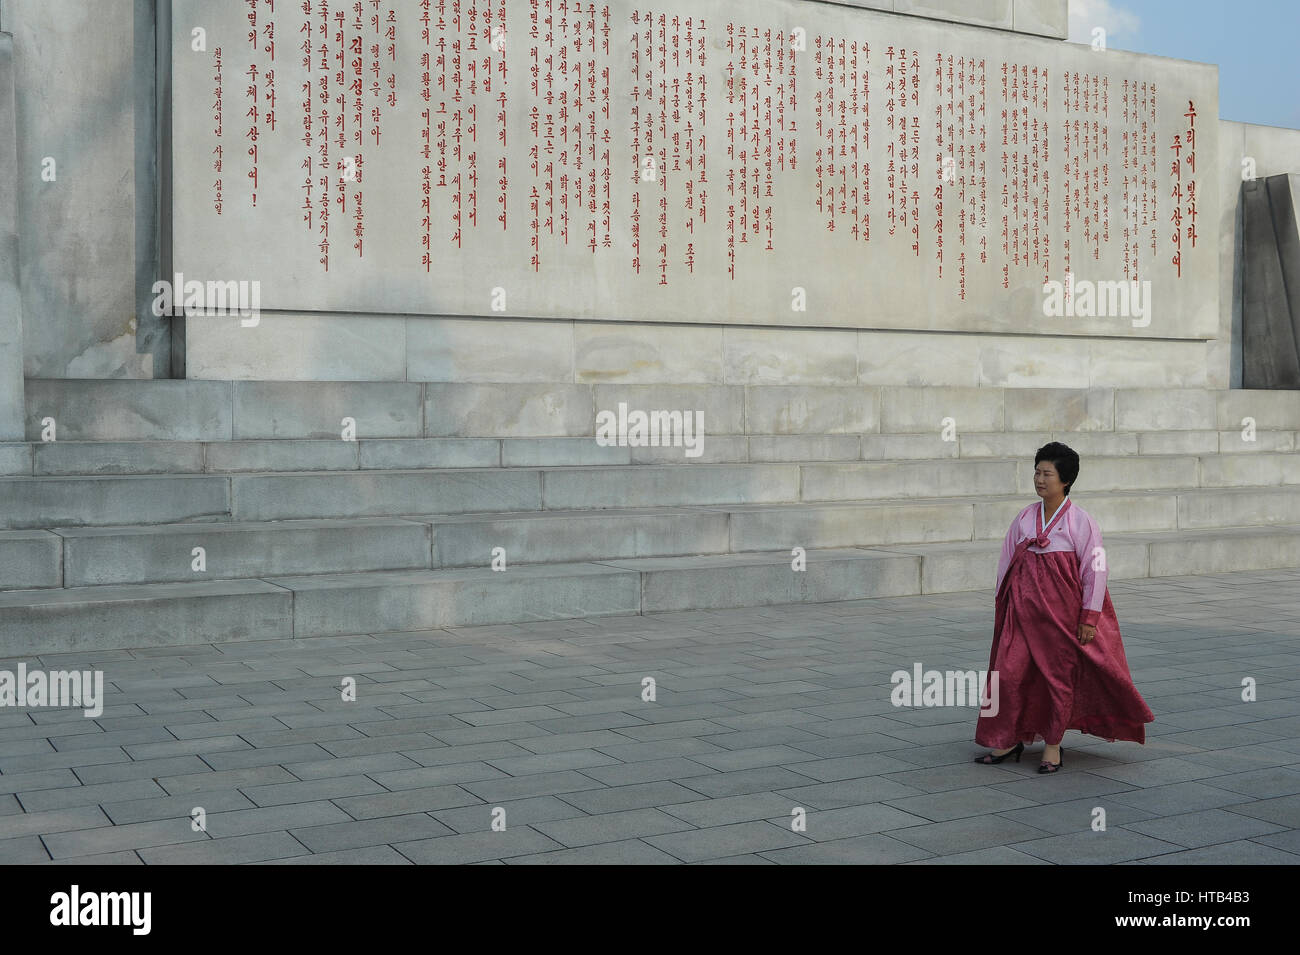 08.08.2012, Pyongyang, North Korea - A North Korean woman wearing a traditional dress is seen at the pedestal of the Tower of Juche. Stock Photo